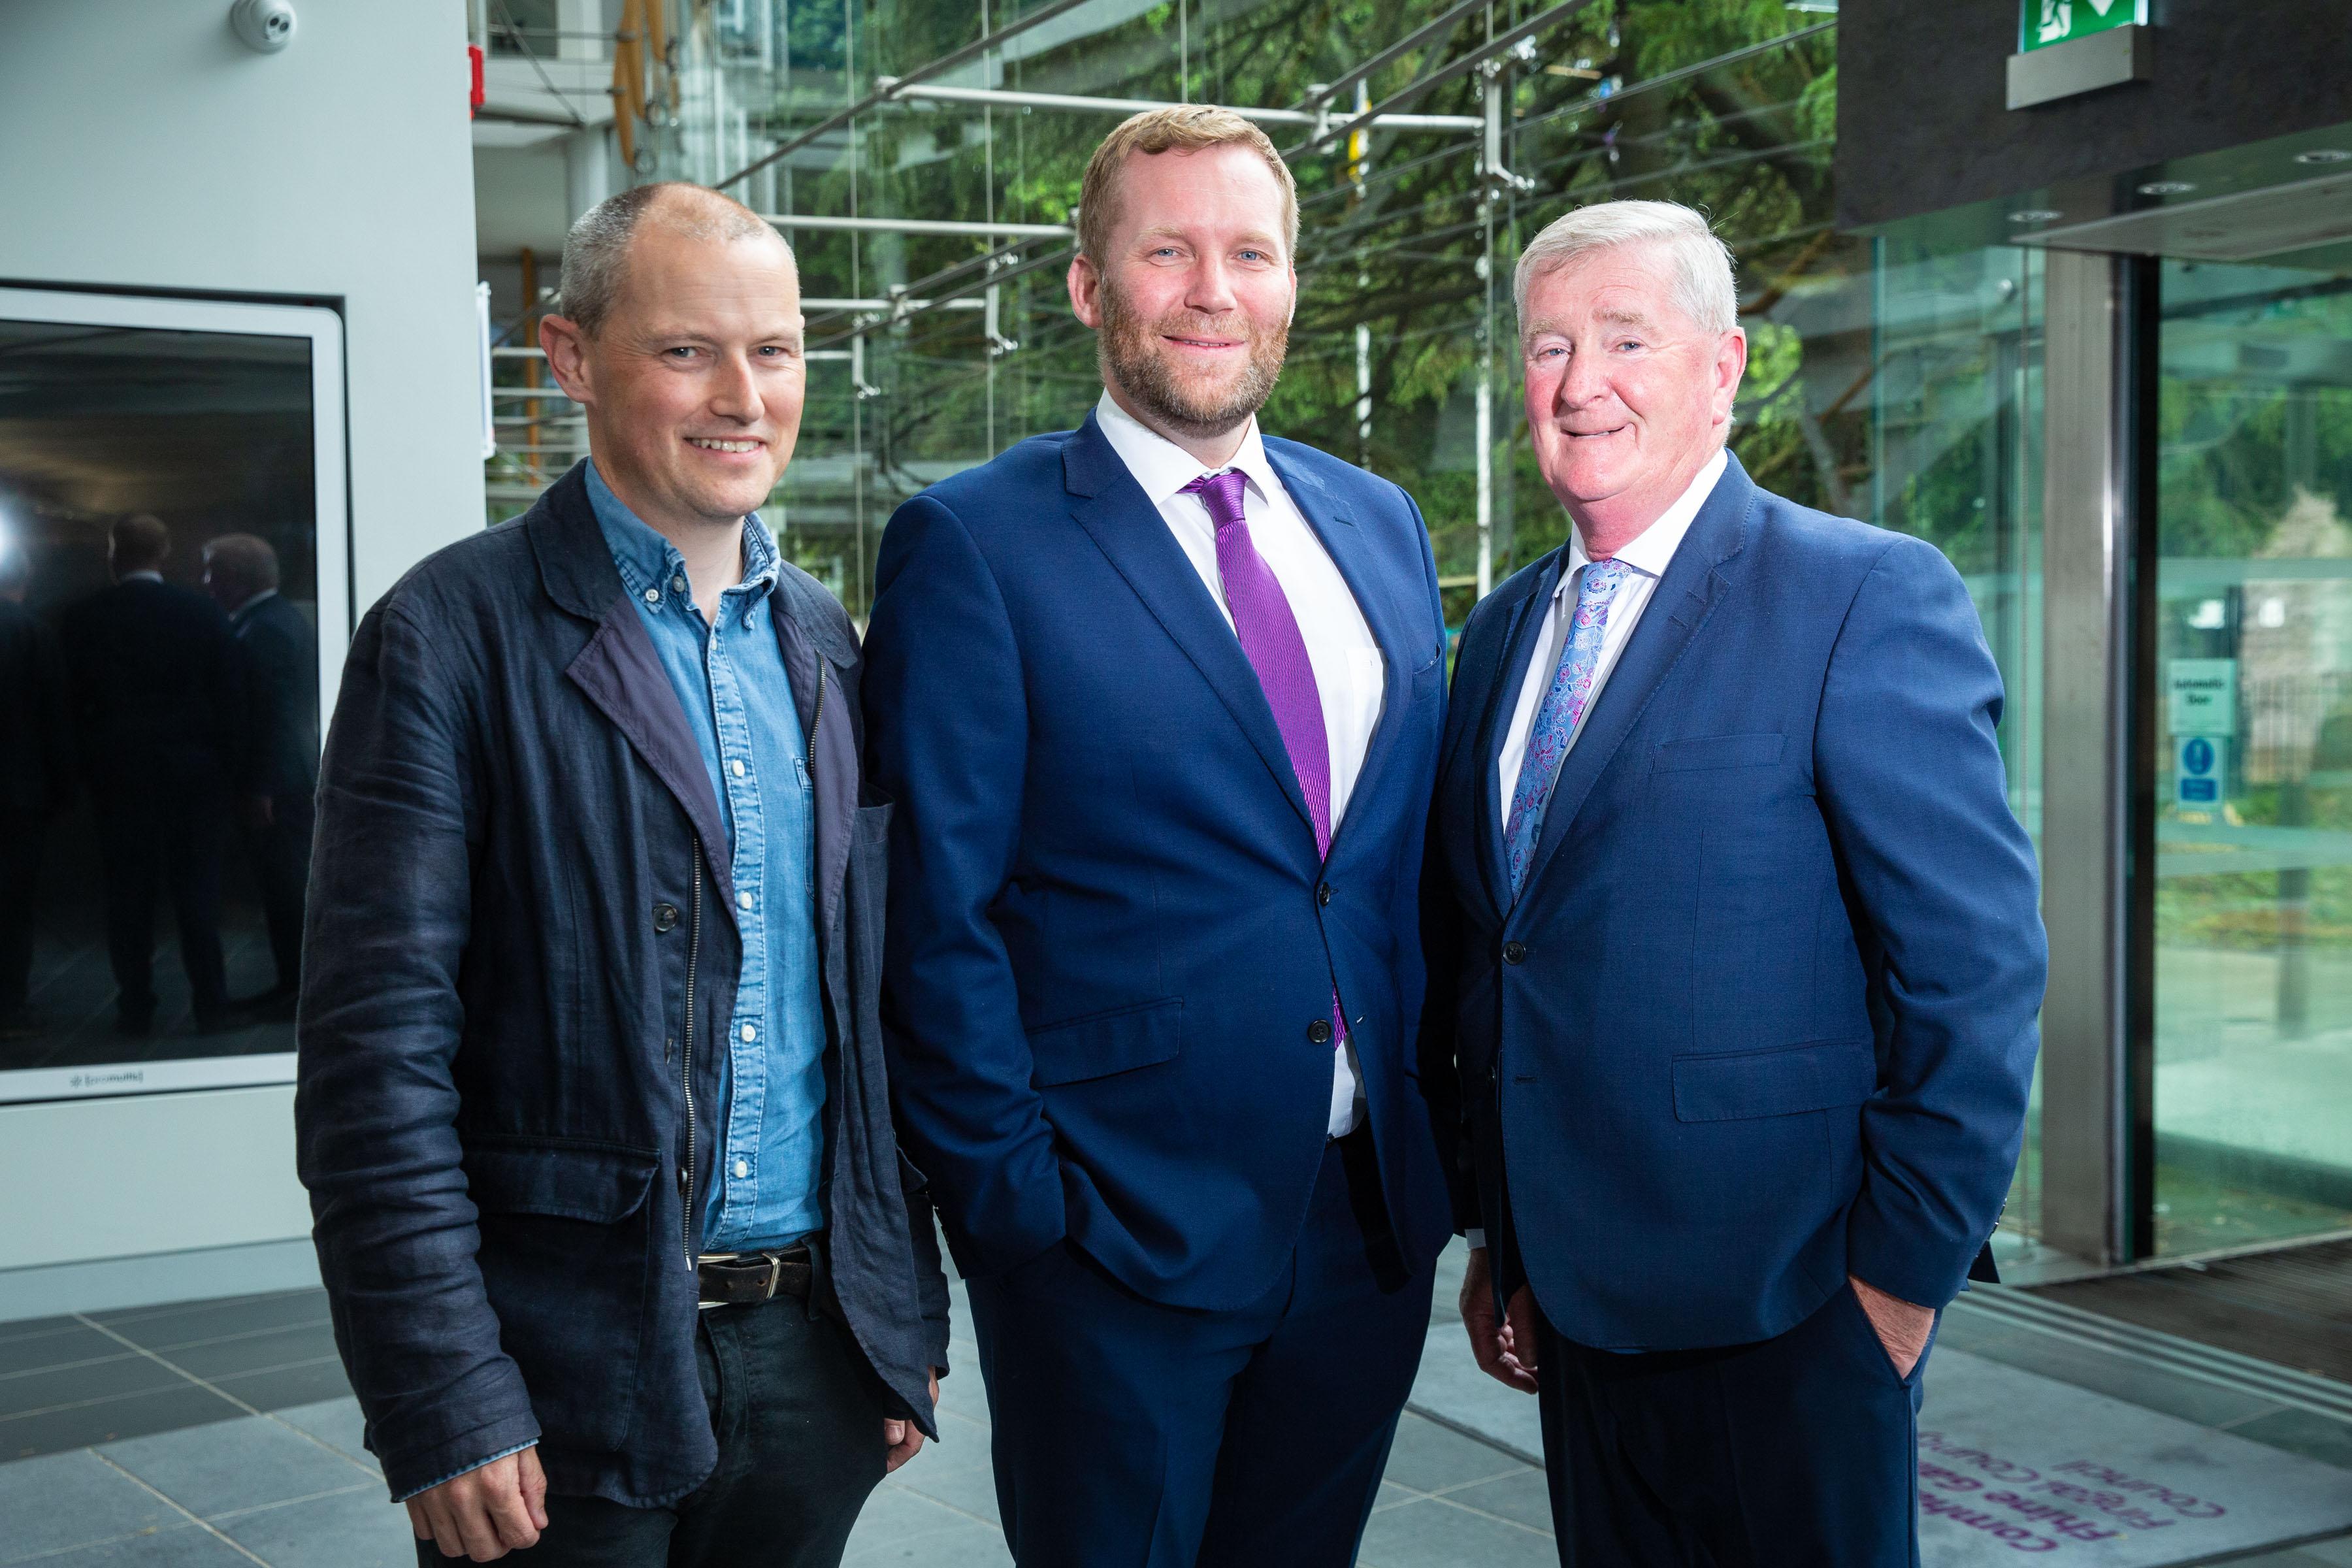 Fingal Councillors have elected the Chairs of each of the three Area Committees